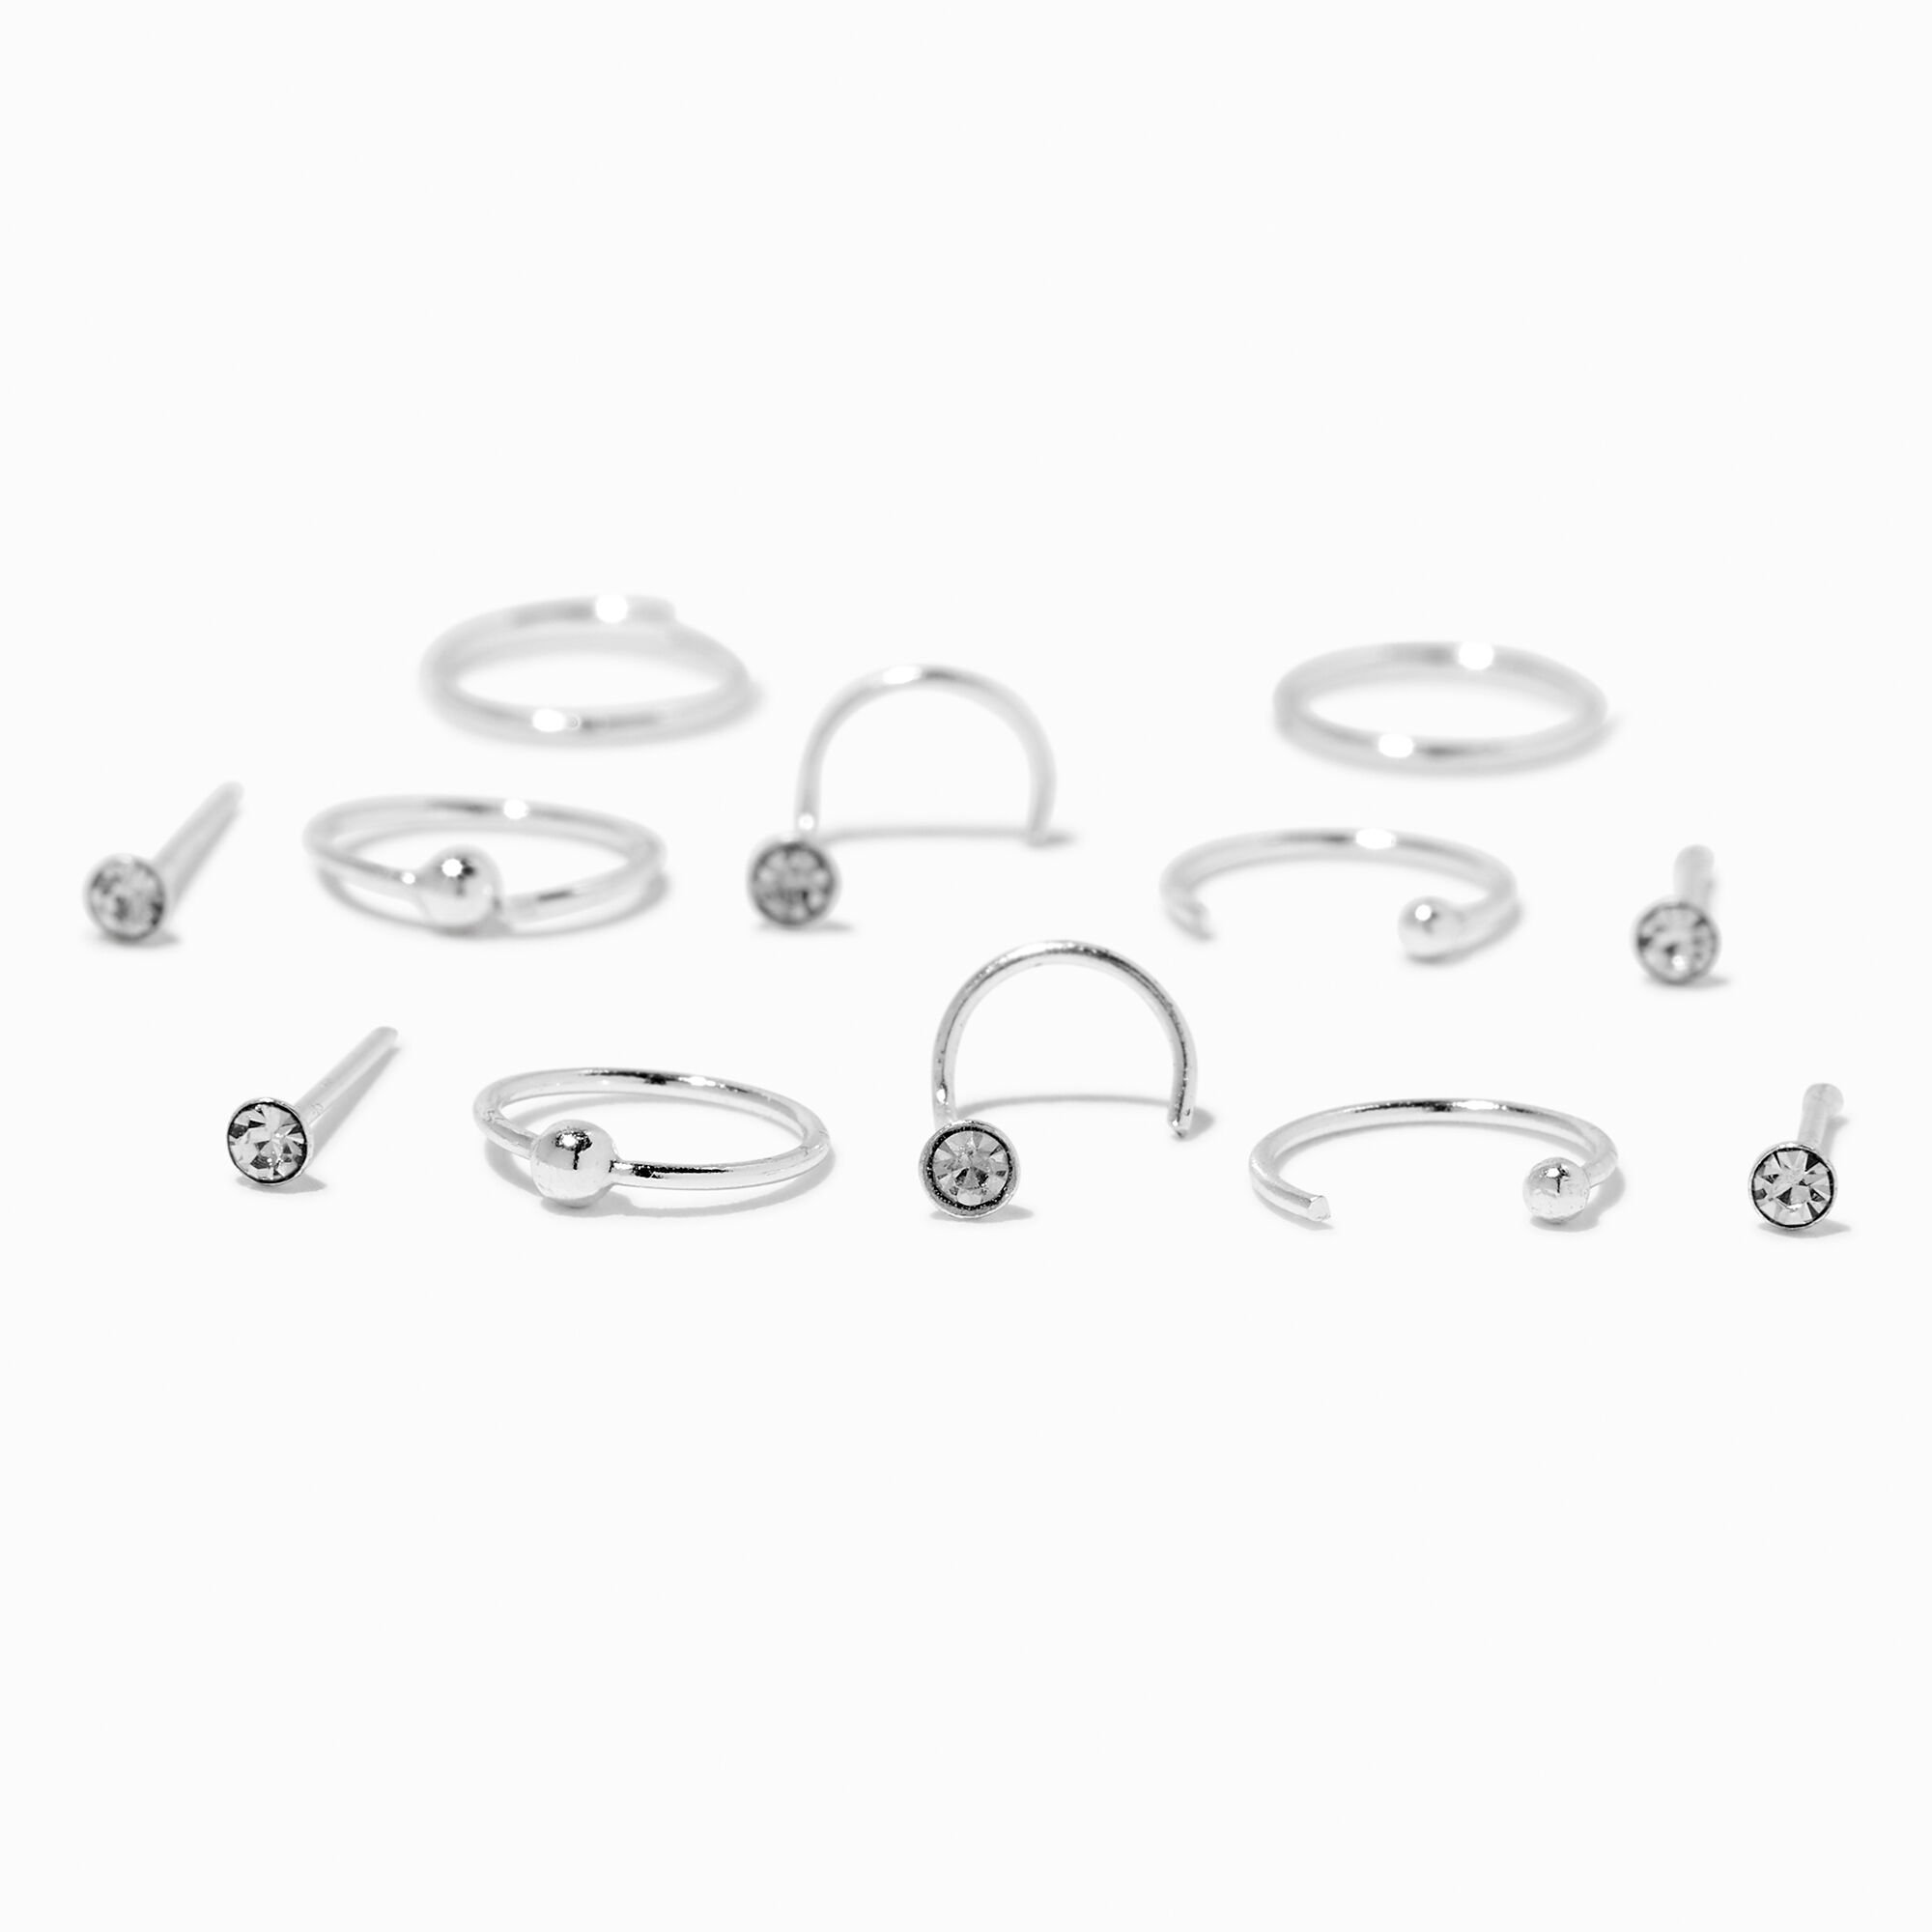 View Claires 22G Crystal Nose Studs Hoop 12 Pack Silver information